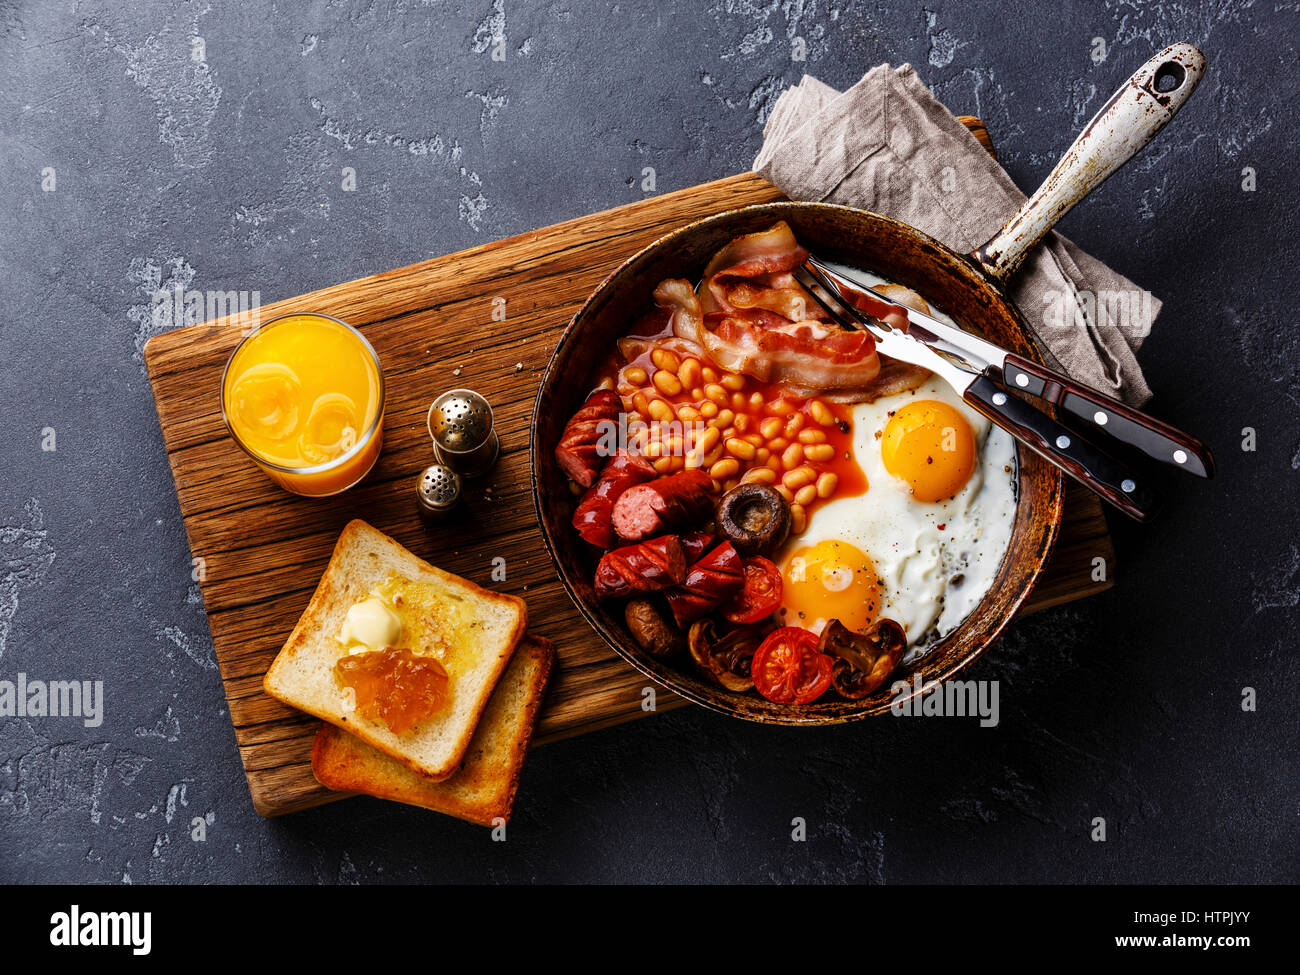 English Breakfast in cooking pan with fried eggs, sausages, bacon, beans, toasts and orange juice on dark stone background Stock Photo